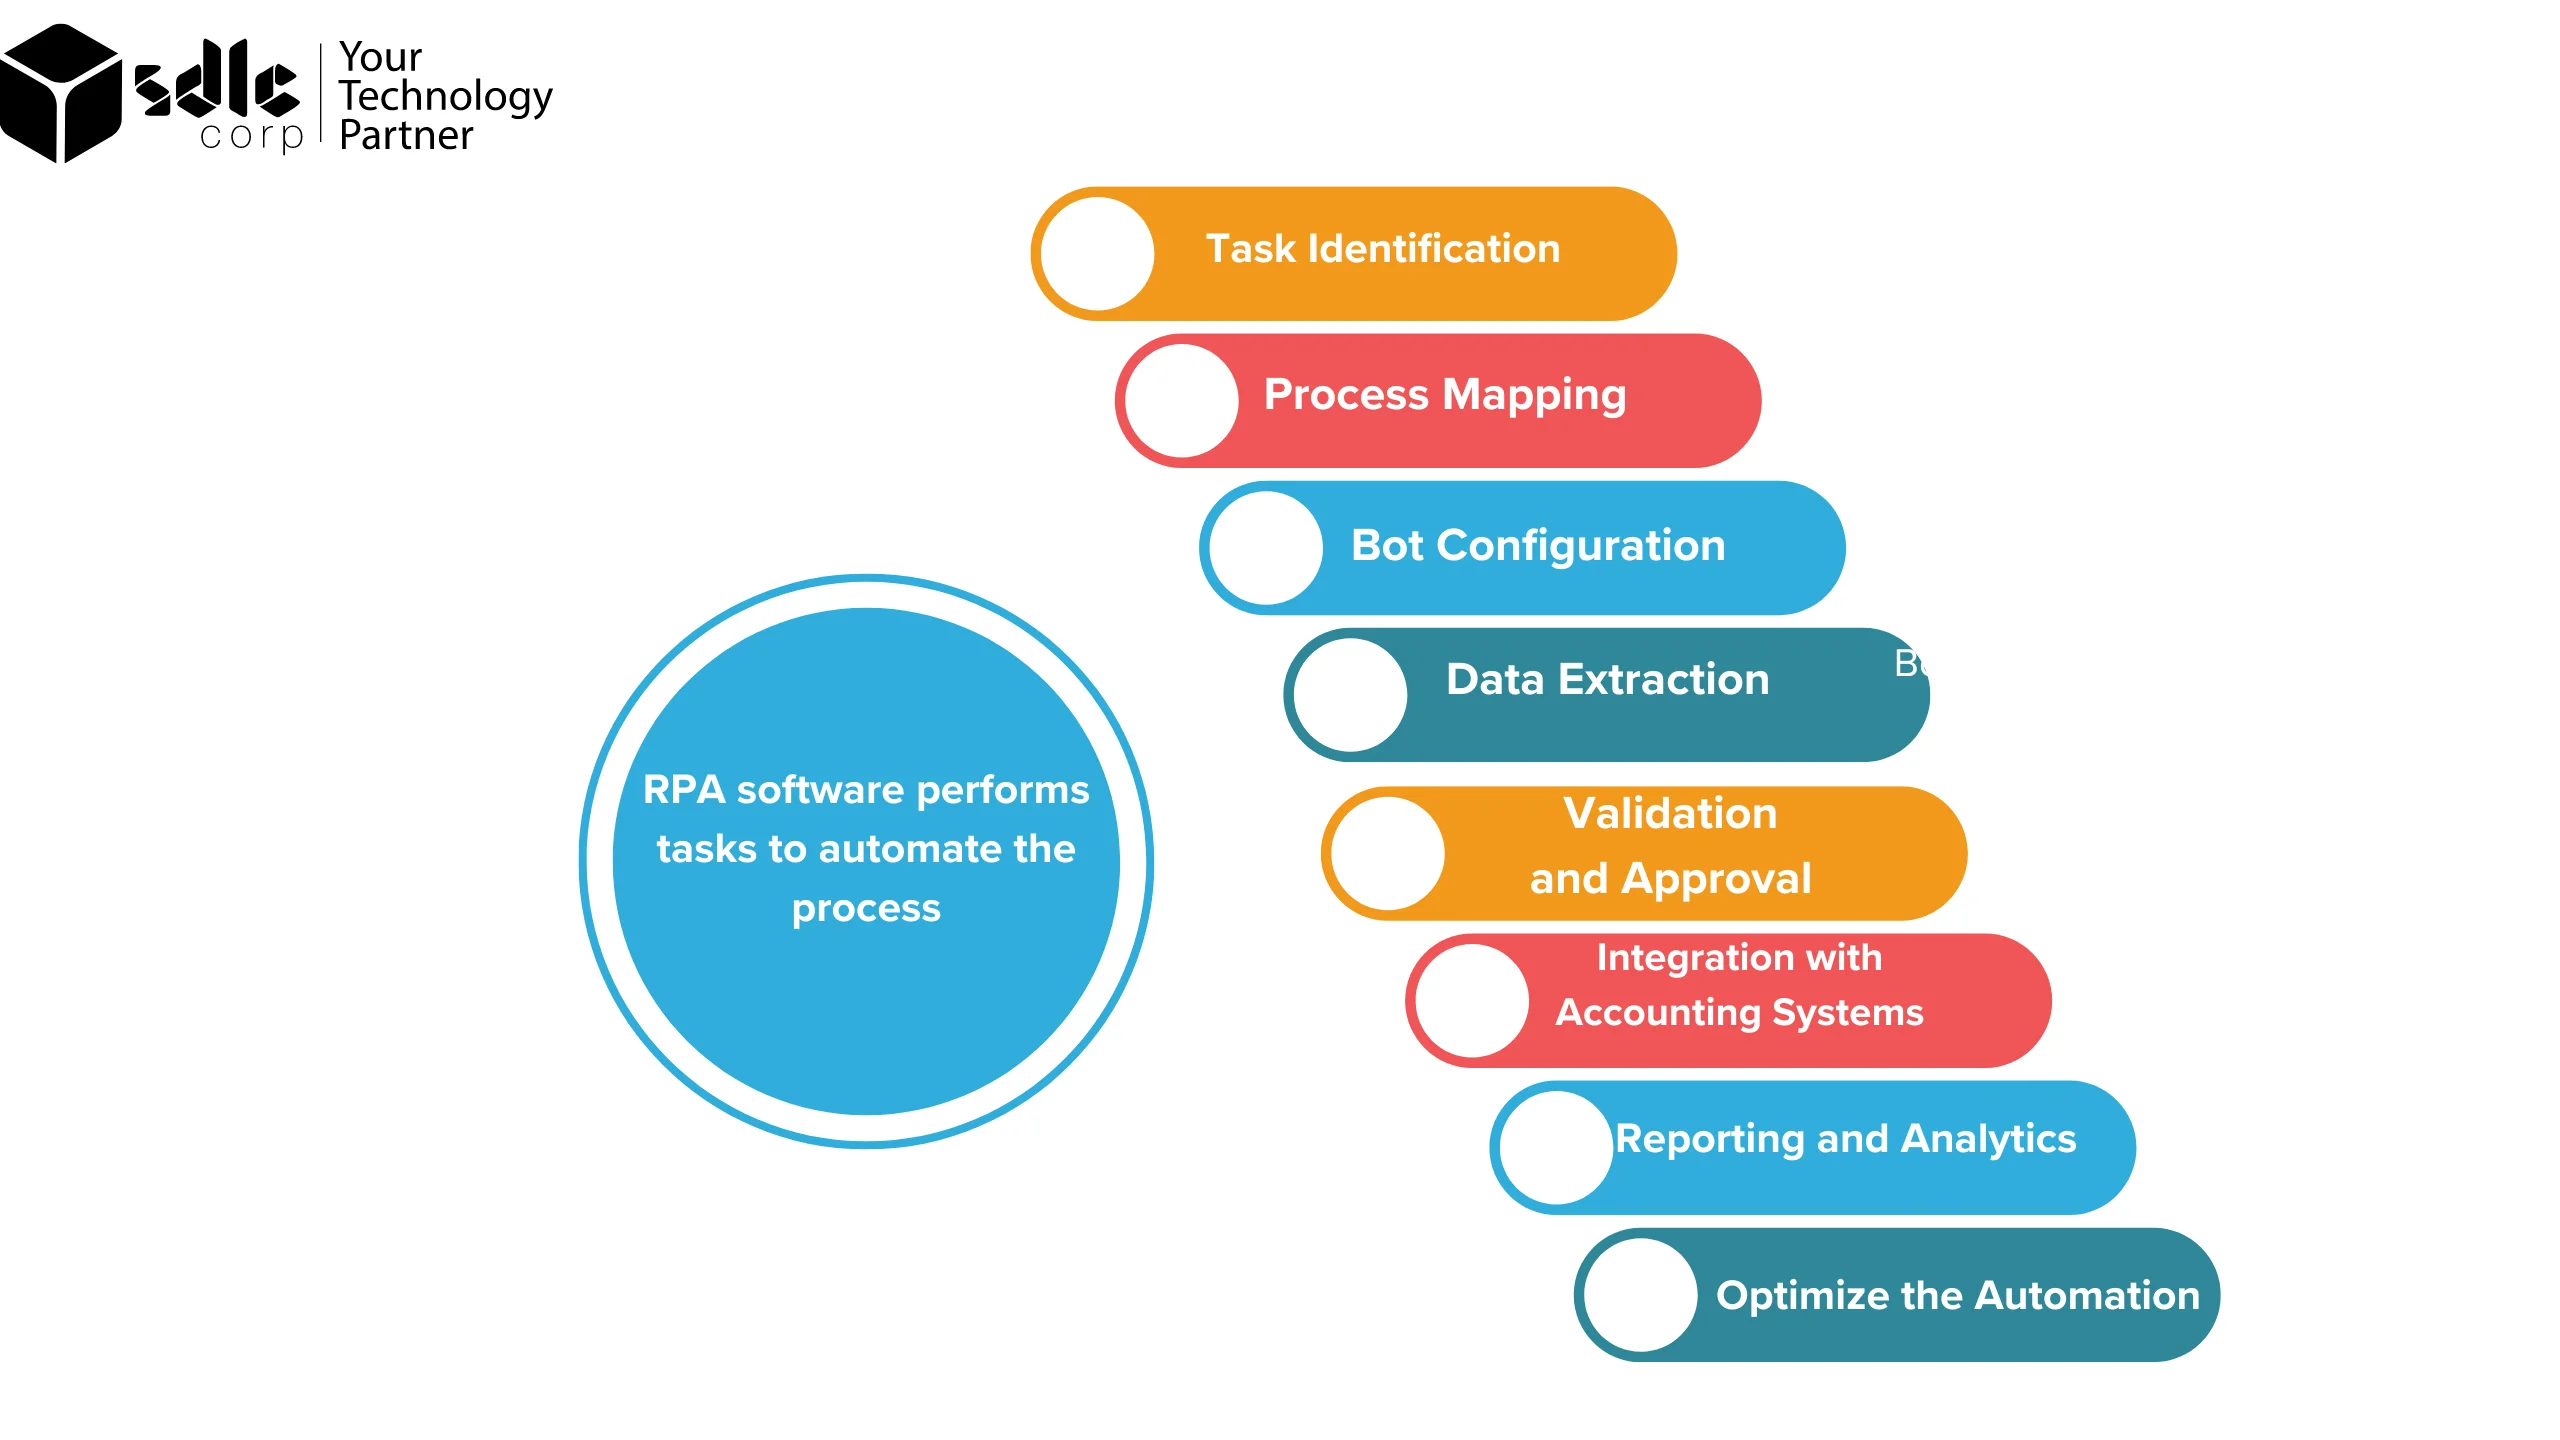 RPA software performs tasks to automate the process